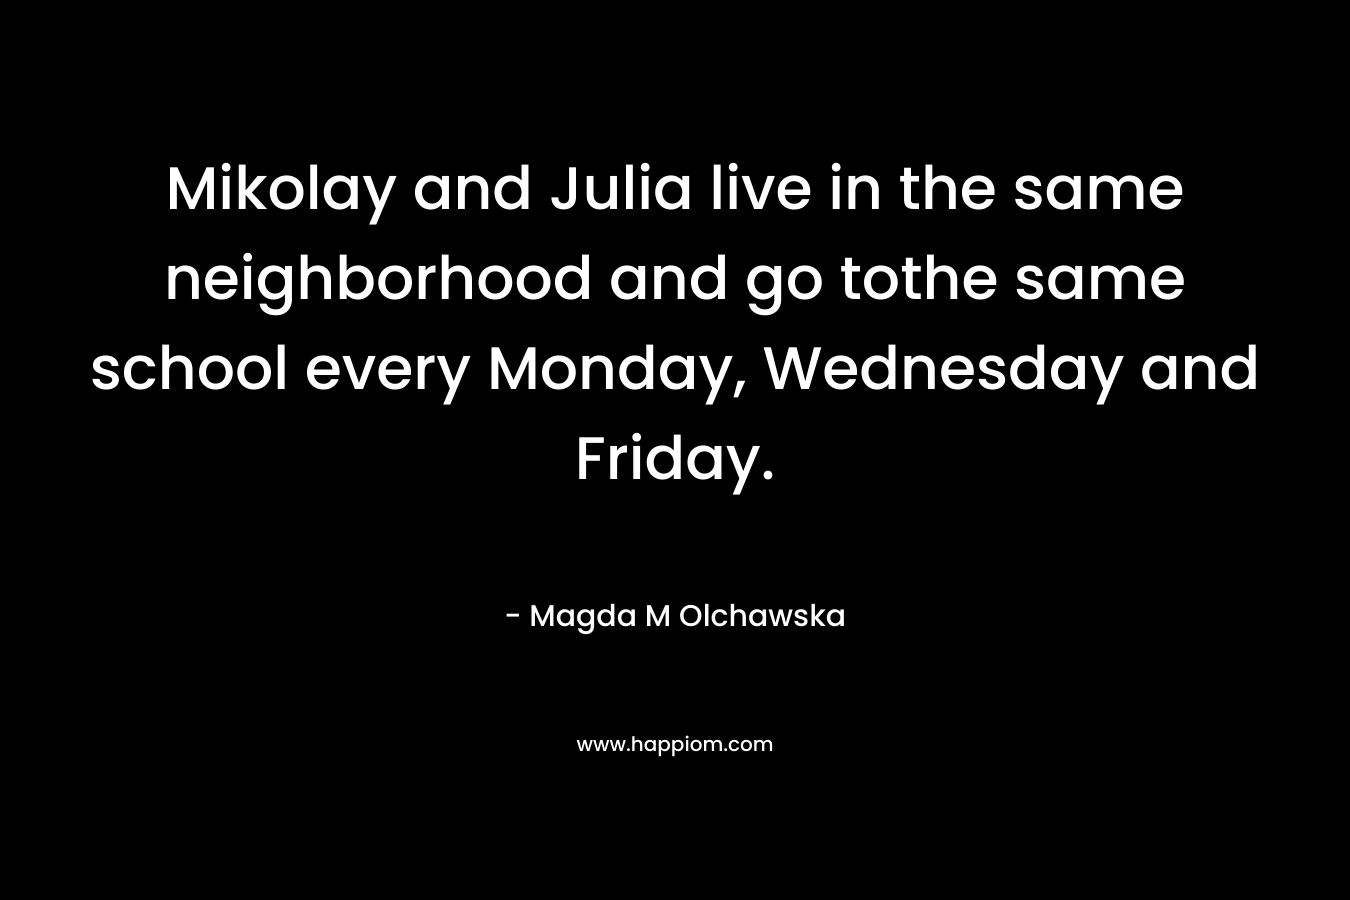 Mikolay and Julia live in the same neighborhood and go tothe same school every Monday, Wednesday and Friday. – Magda M Olchawska